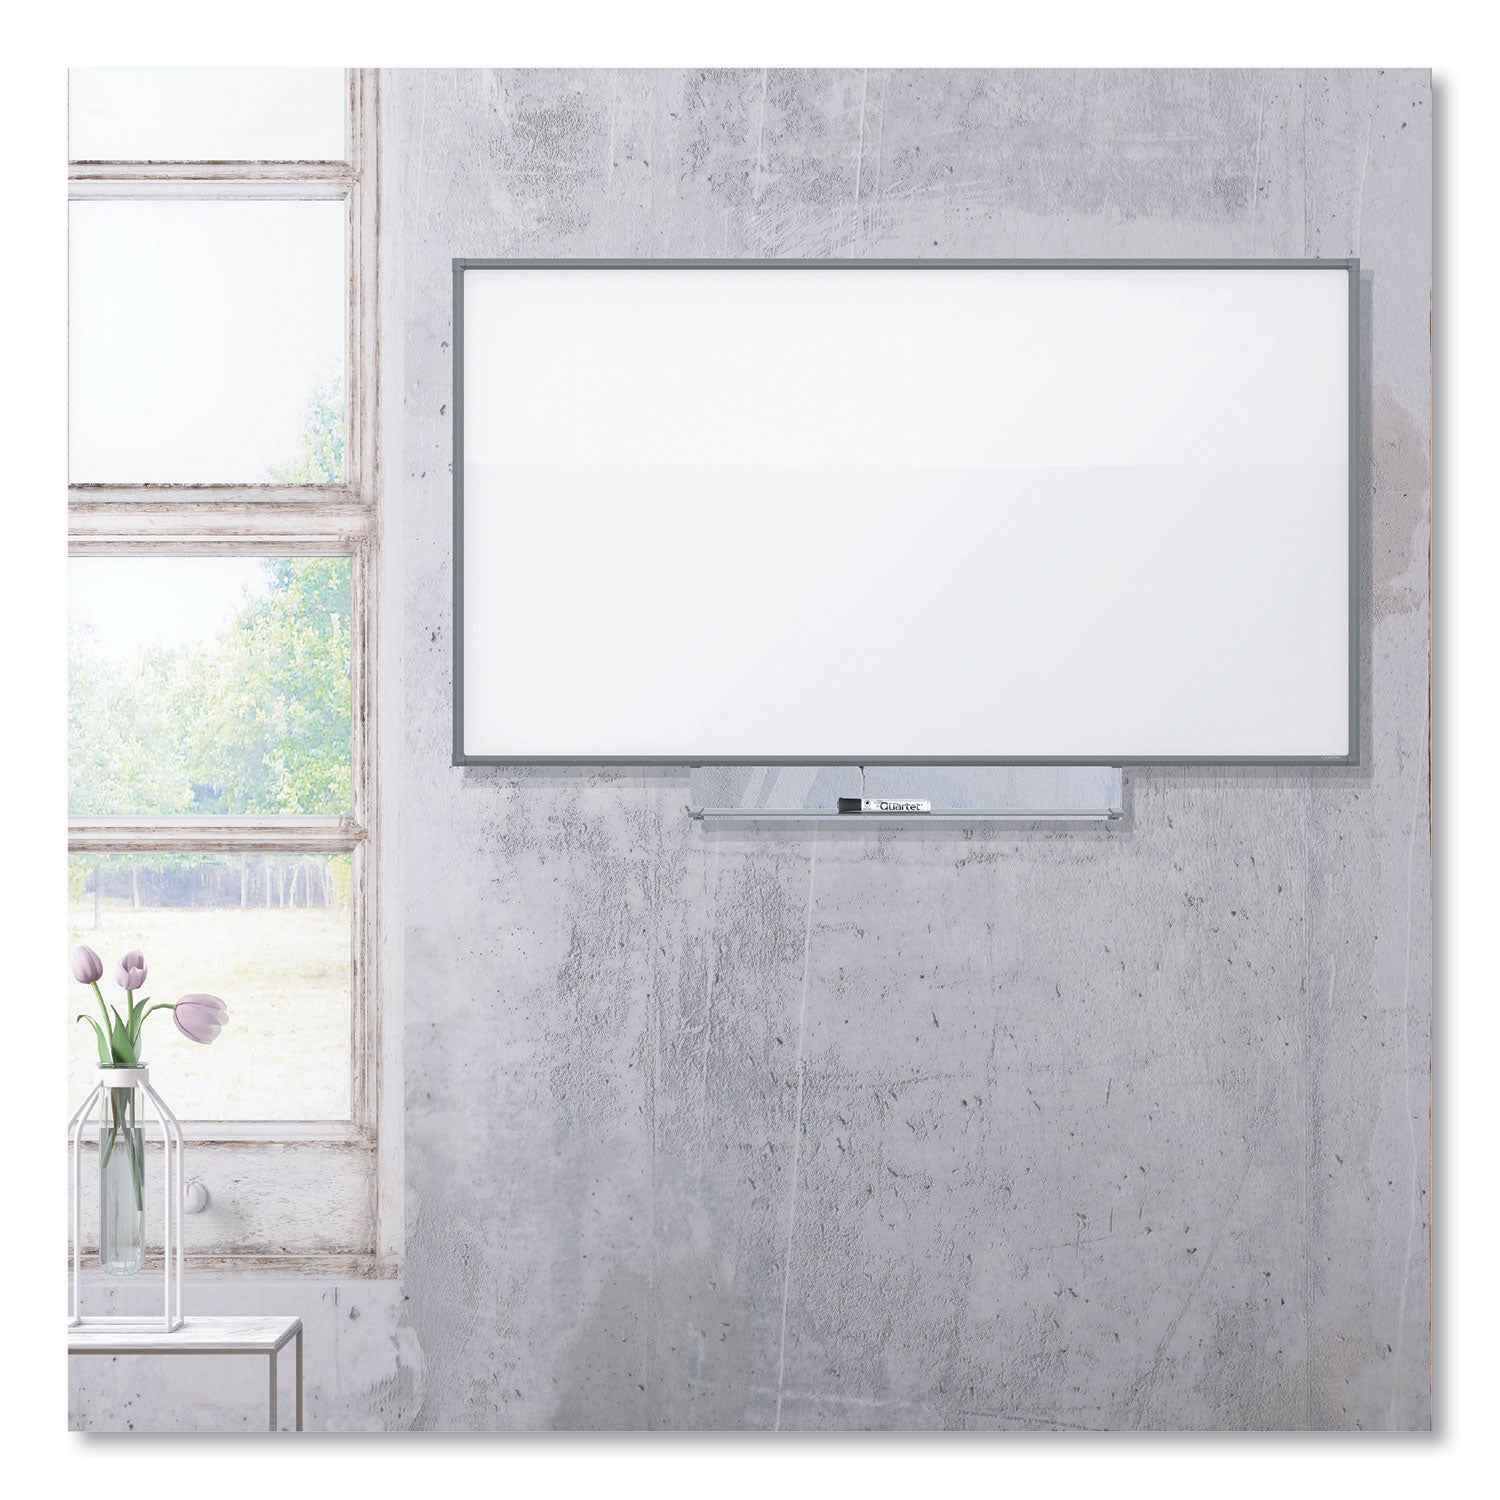 Porcelain Dry Erase Boards, Widescreen, 72 x 48, White Surface, Aluminum Frame - 